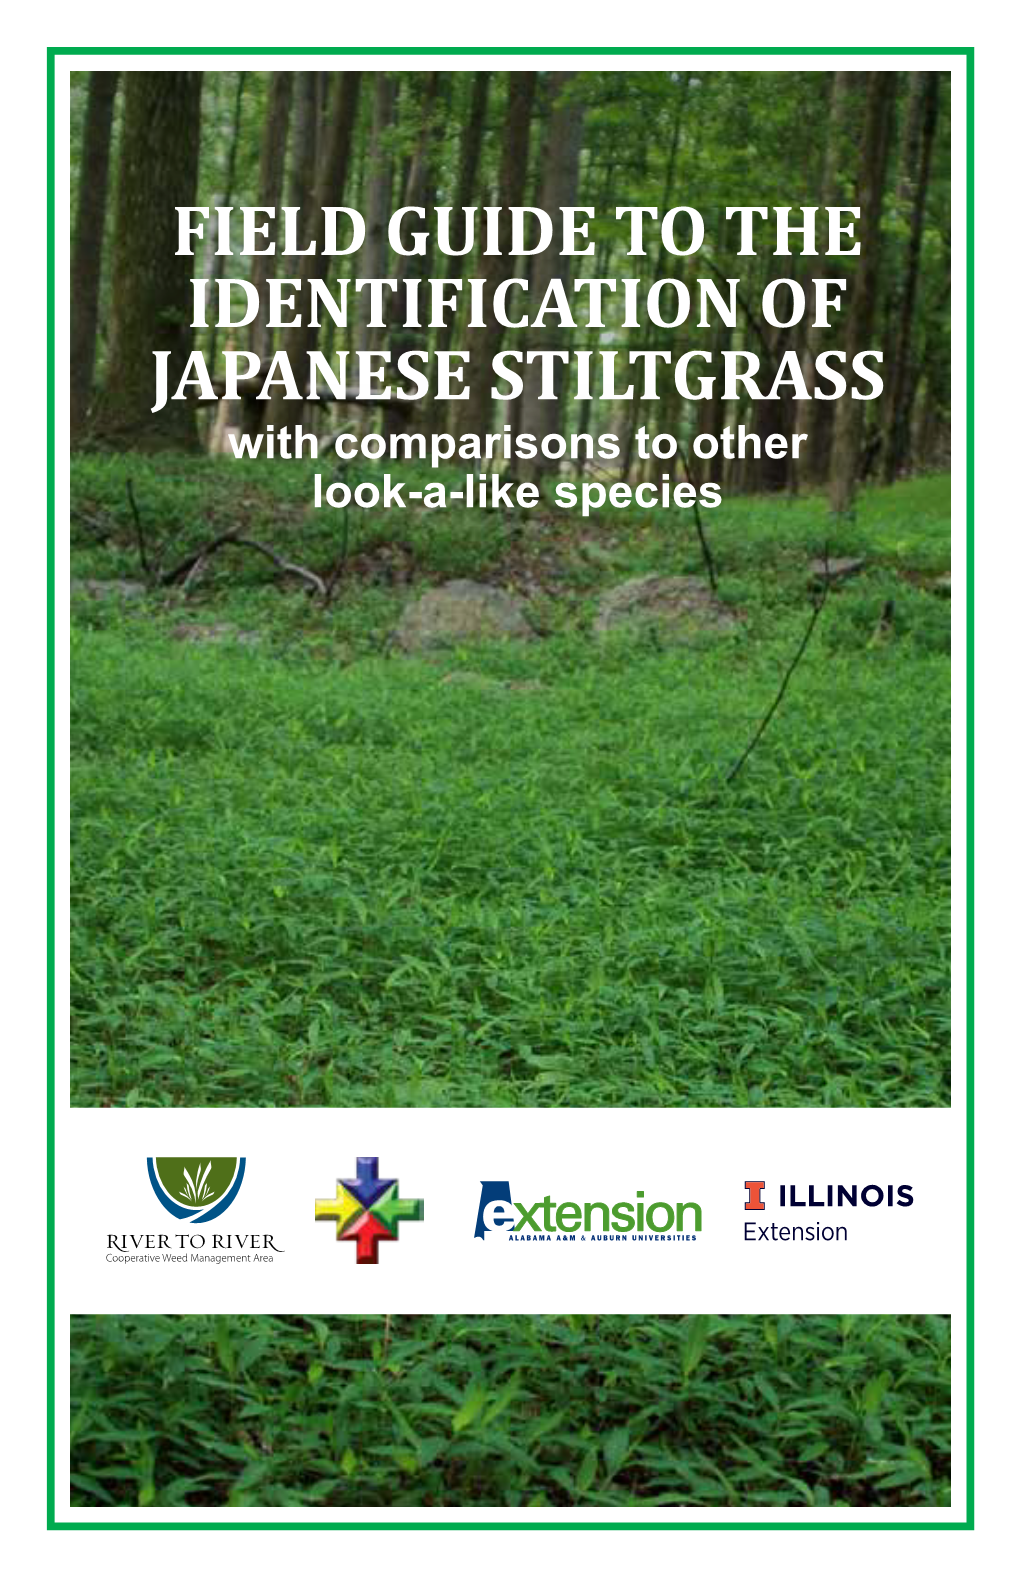 Field Guide to the Identification of Japanese Stiltgrass: with Comparisons to Other Look-A-Like Species